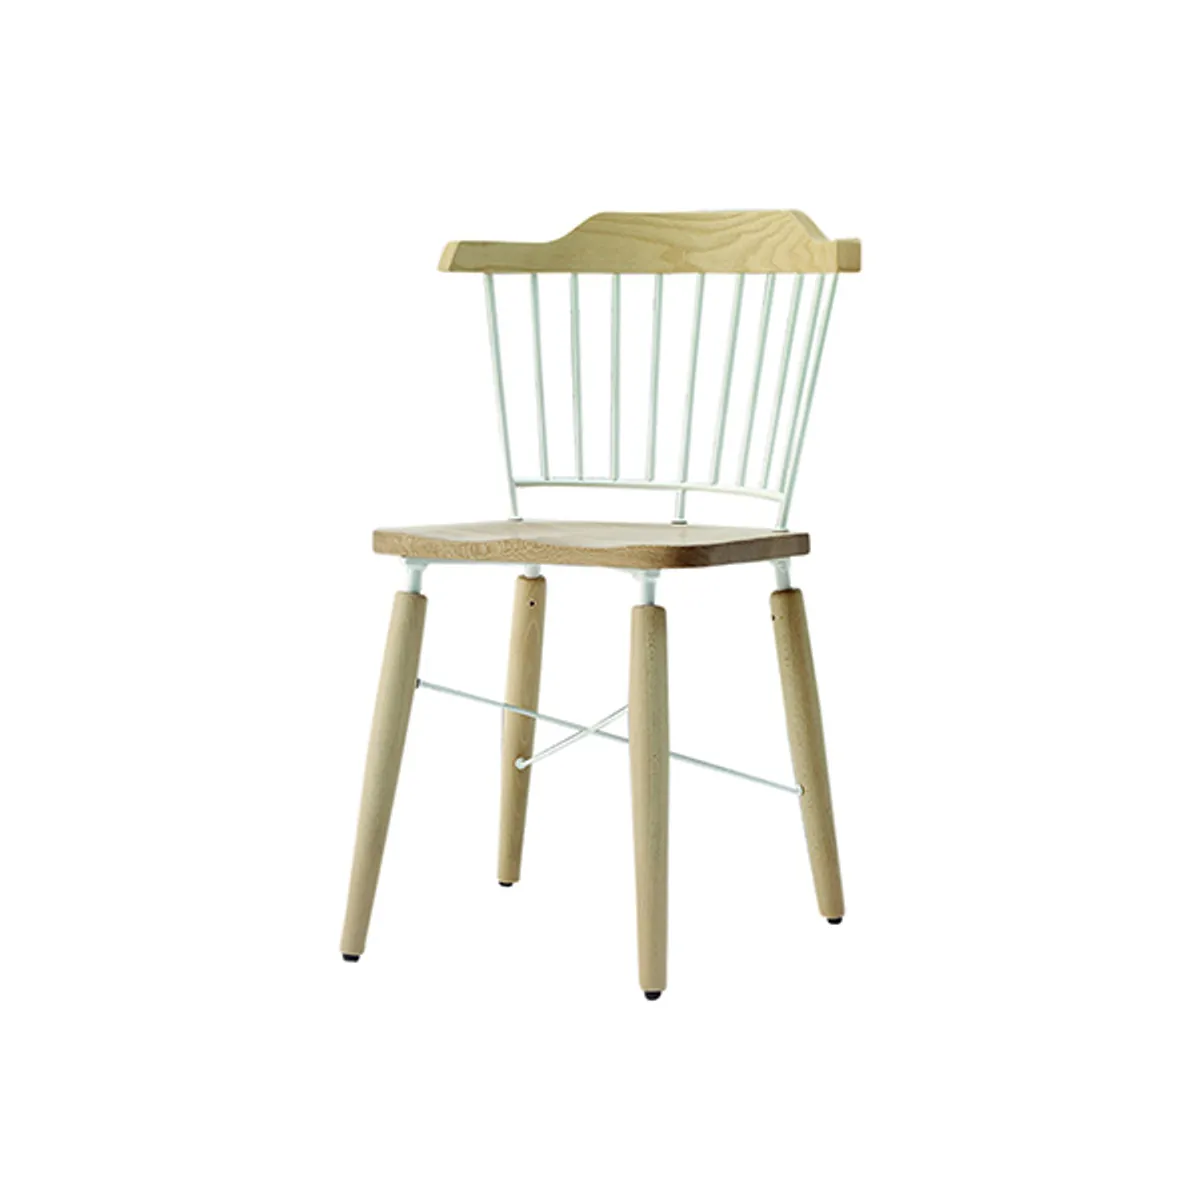 Combo Side Chair 2 Beech Wood Inside Out Contracts